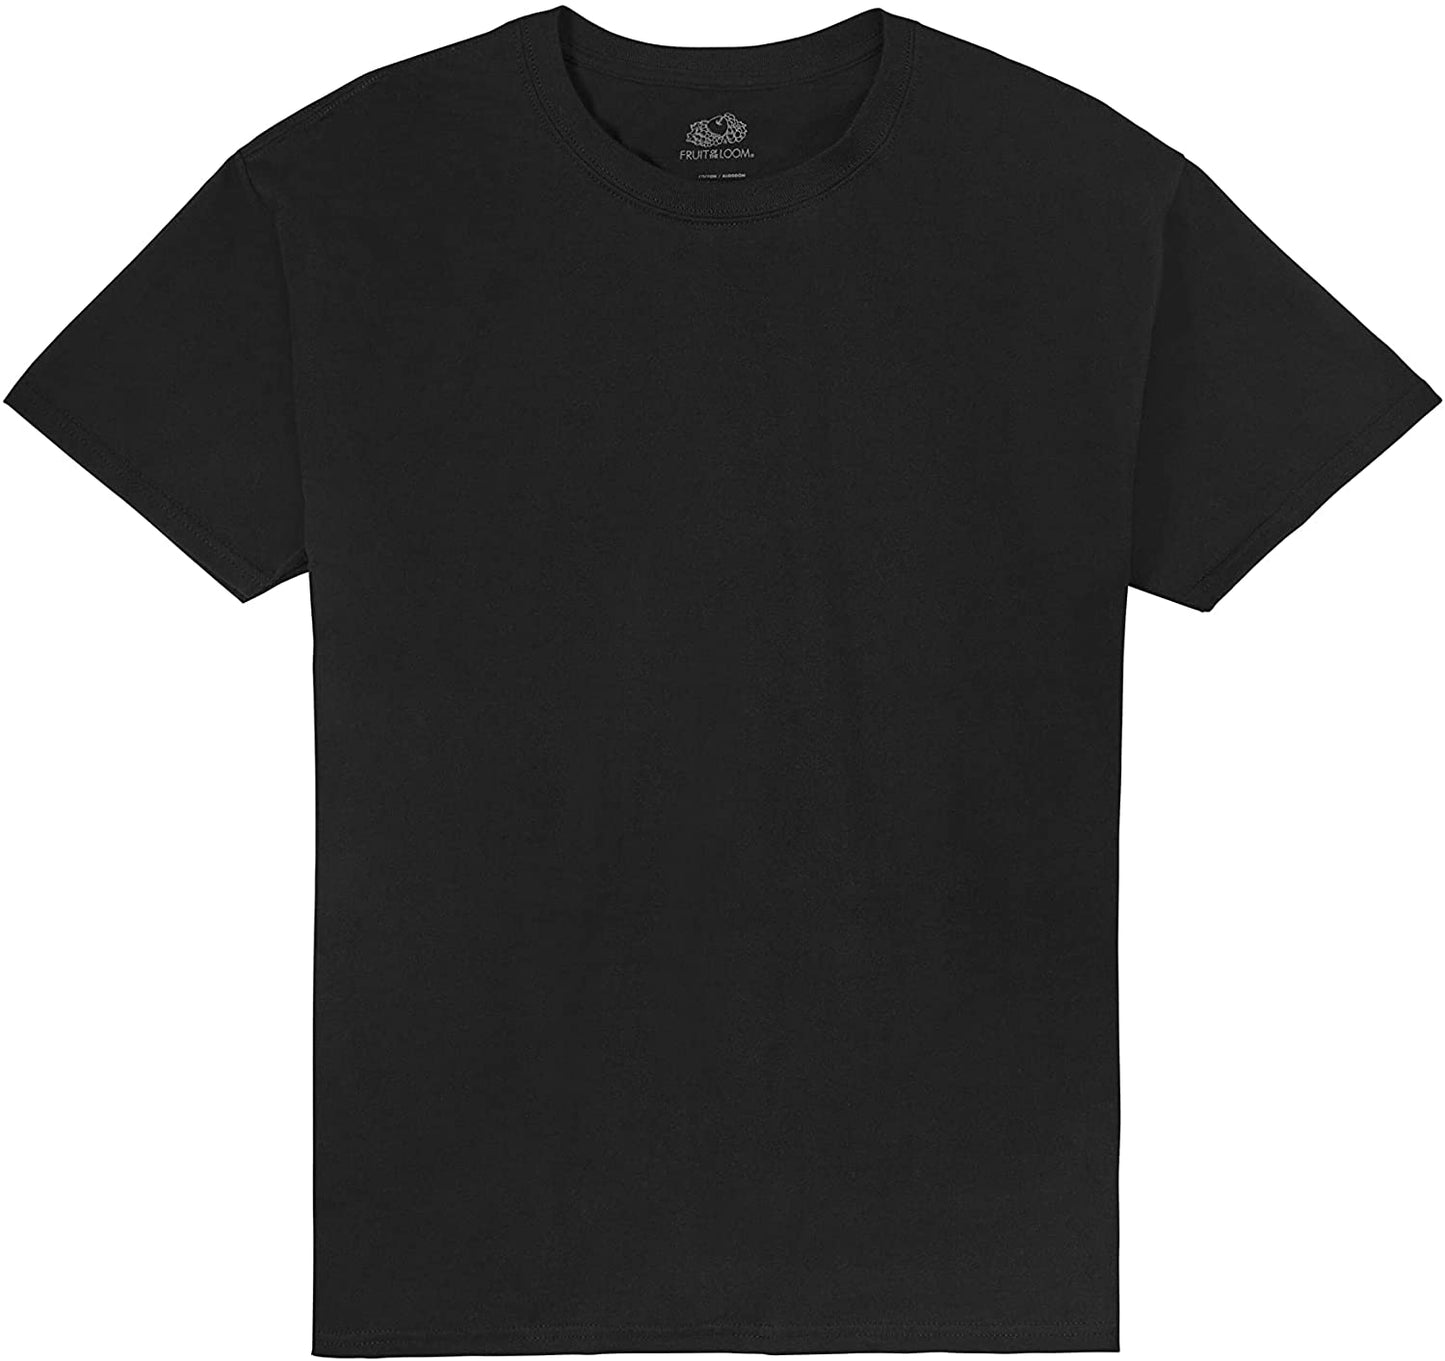 Fruit of the Loom Men's Eversoft Cotton T-Shirts (Big & Tall Sizes)